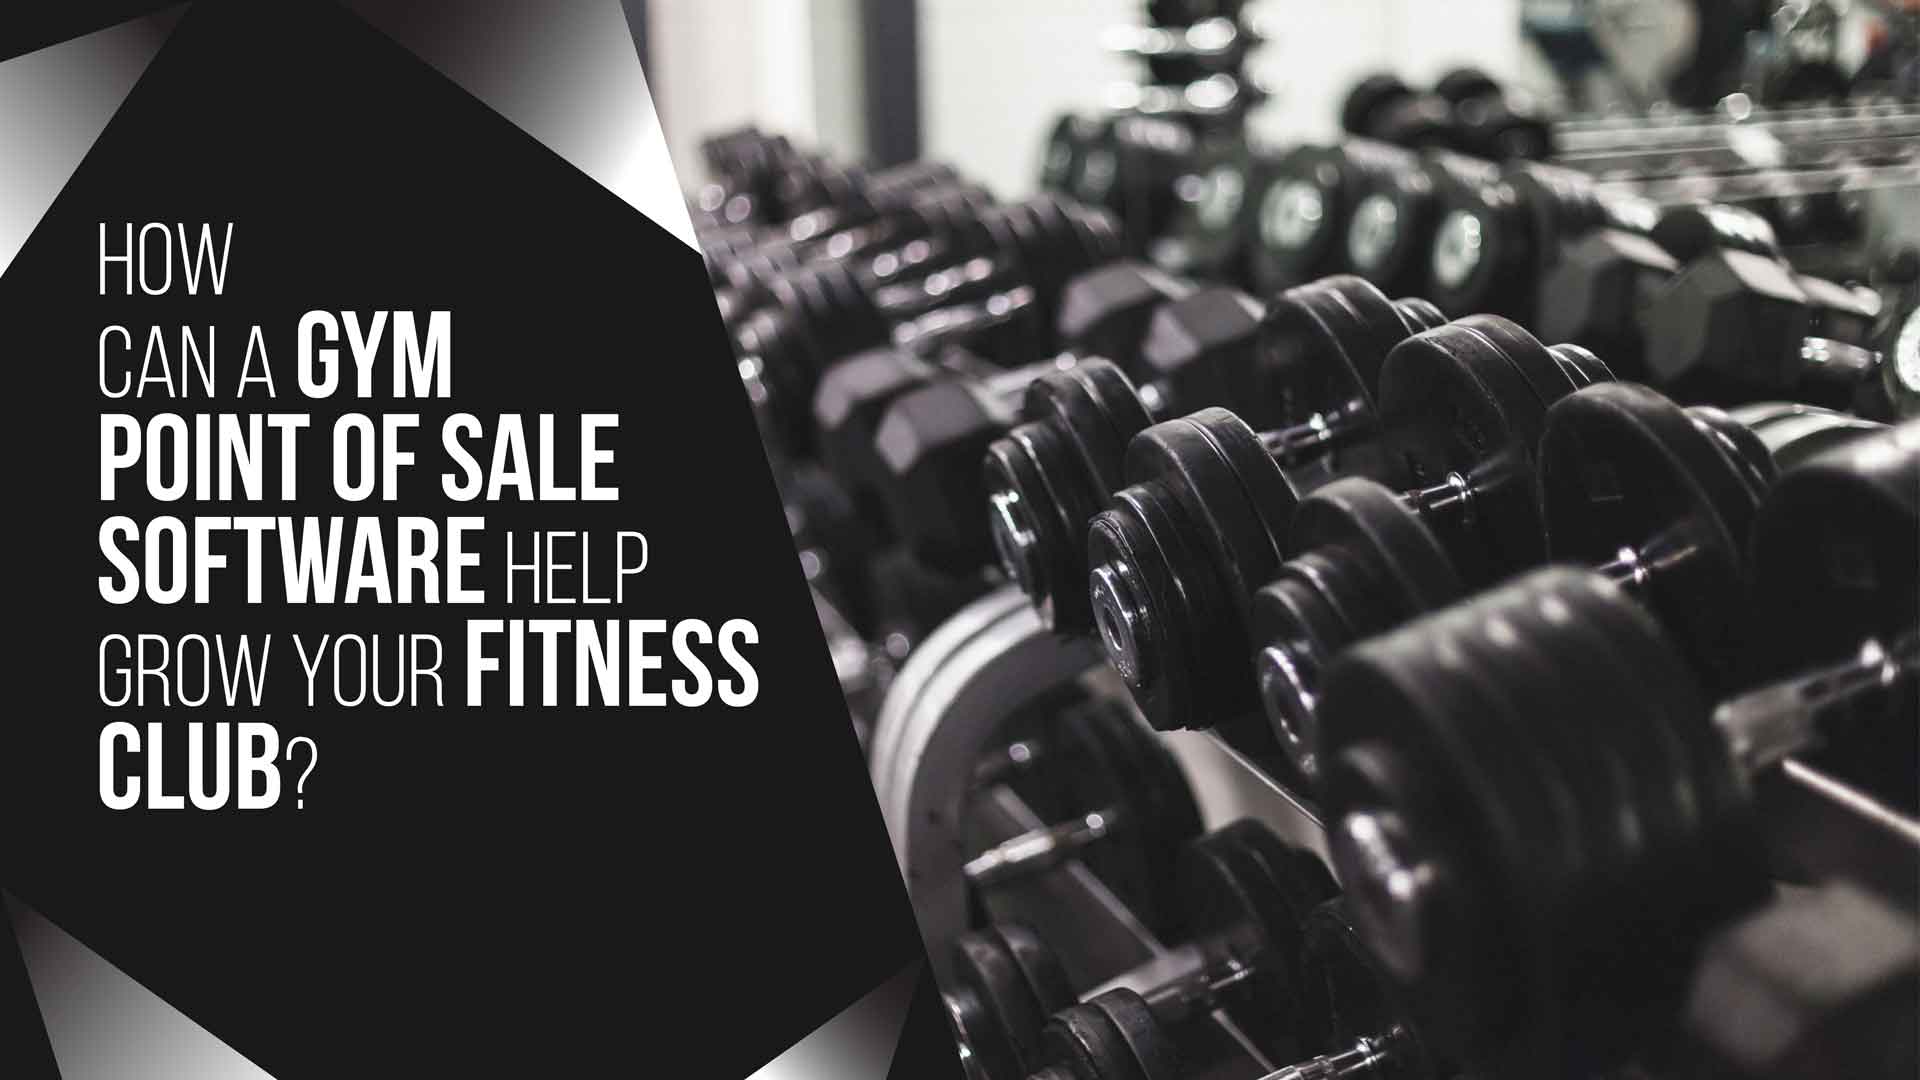 How can a Gym Point of Sale Software help grow your fitness club?